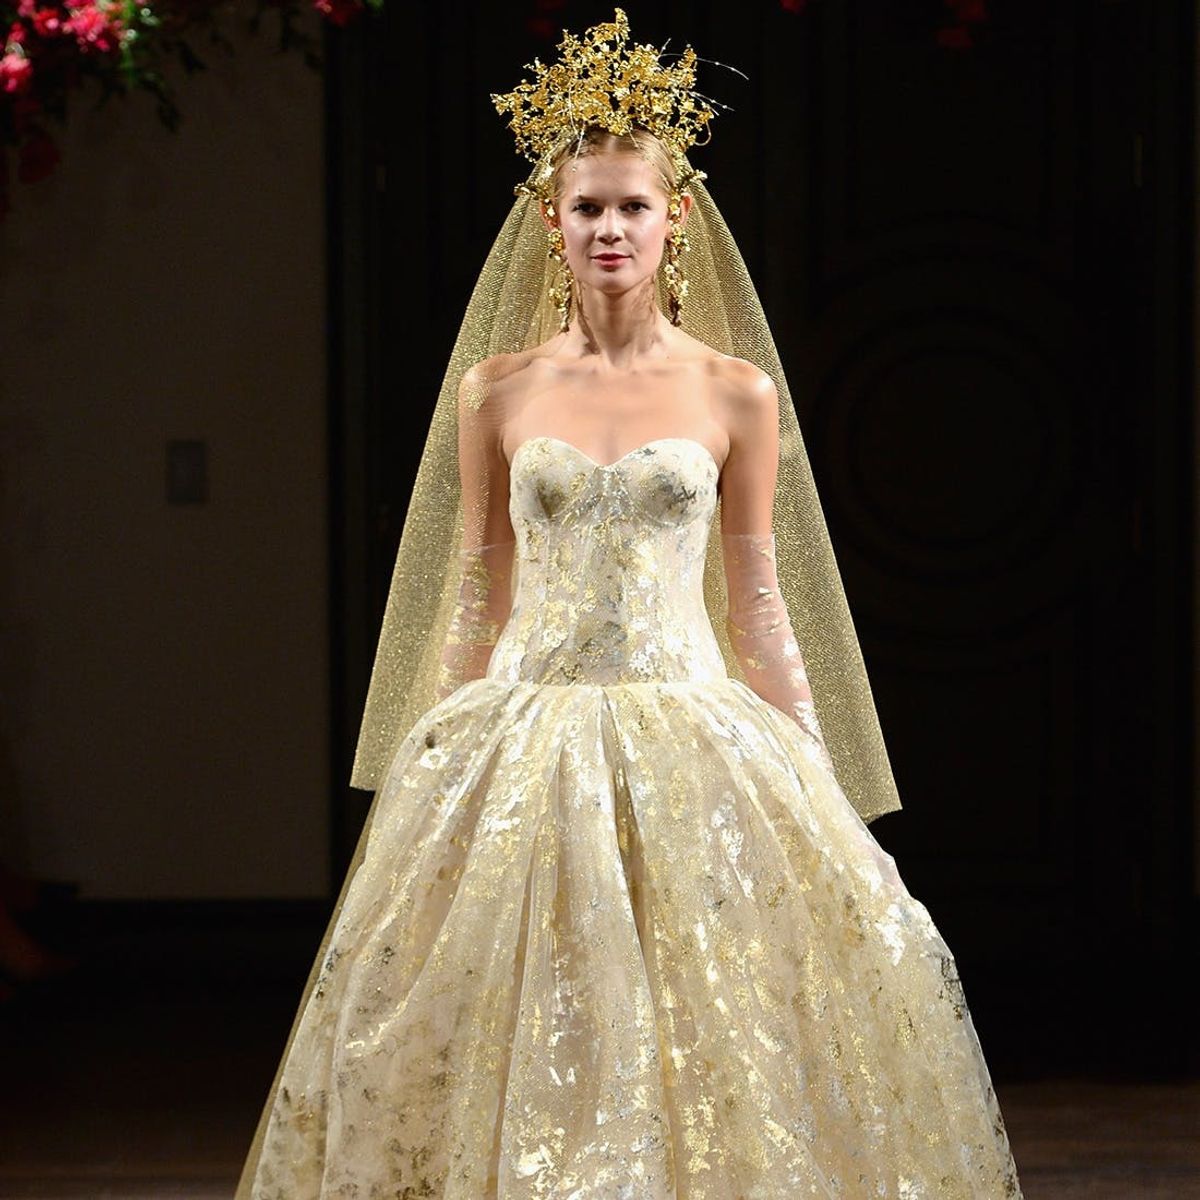 See the 6 Biggest Bridal Trends for 2016